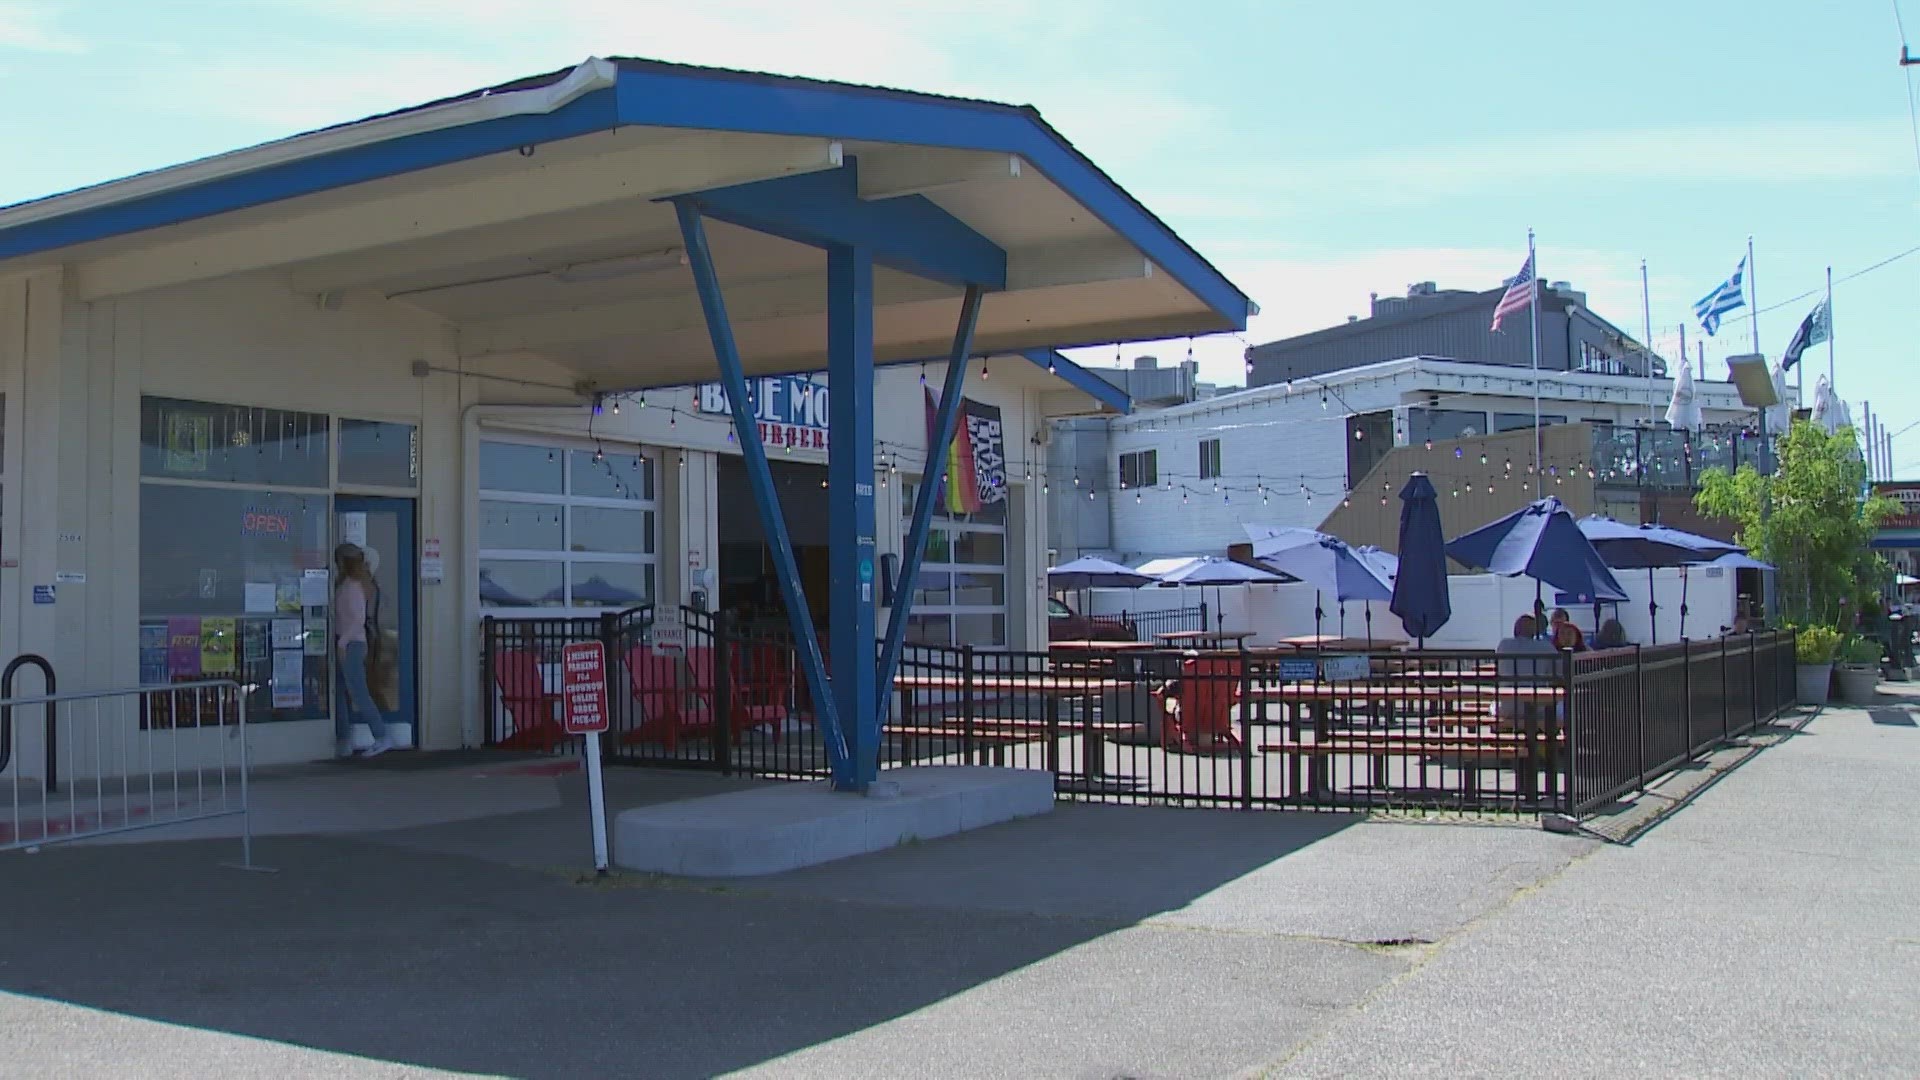 The manager of Blue Moon Burgers near Alki Beach is relieved to see the park's hours will be shortened, saying trouble often comes after 9 p.m.